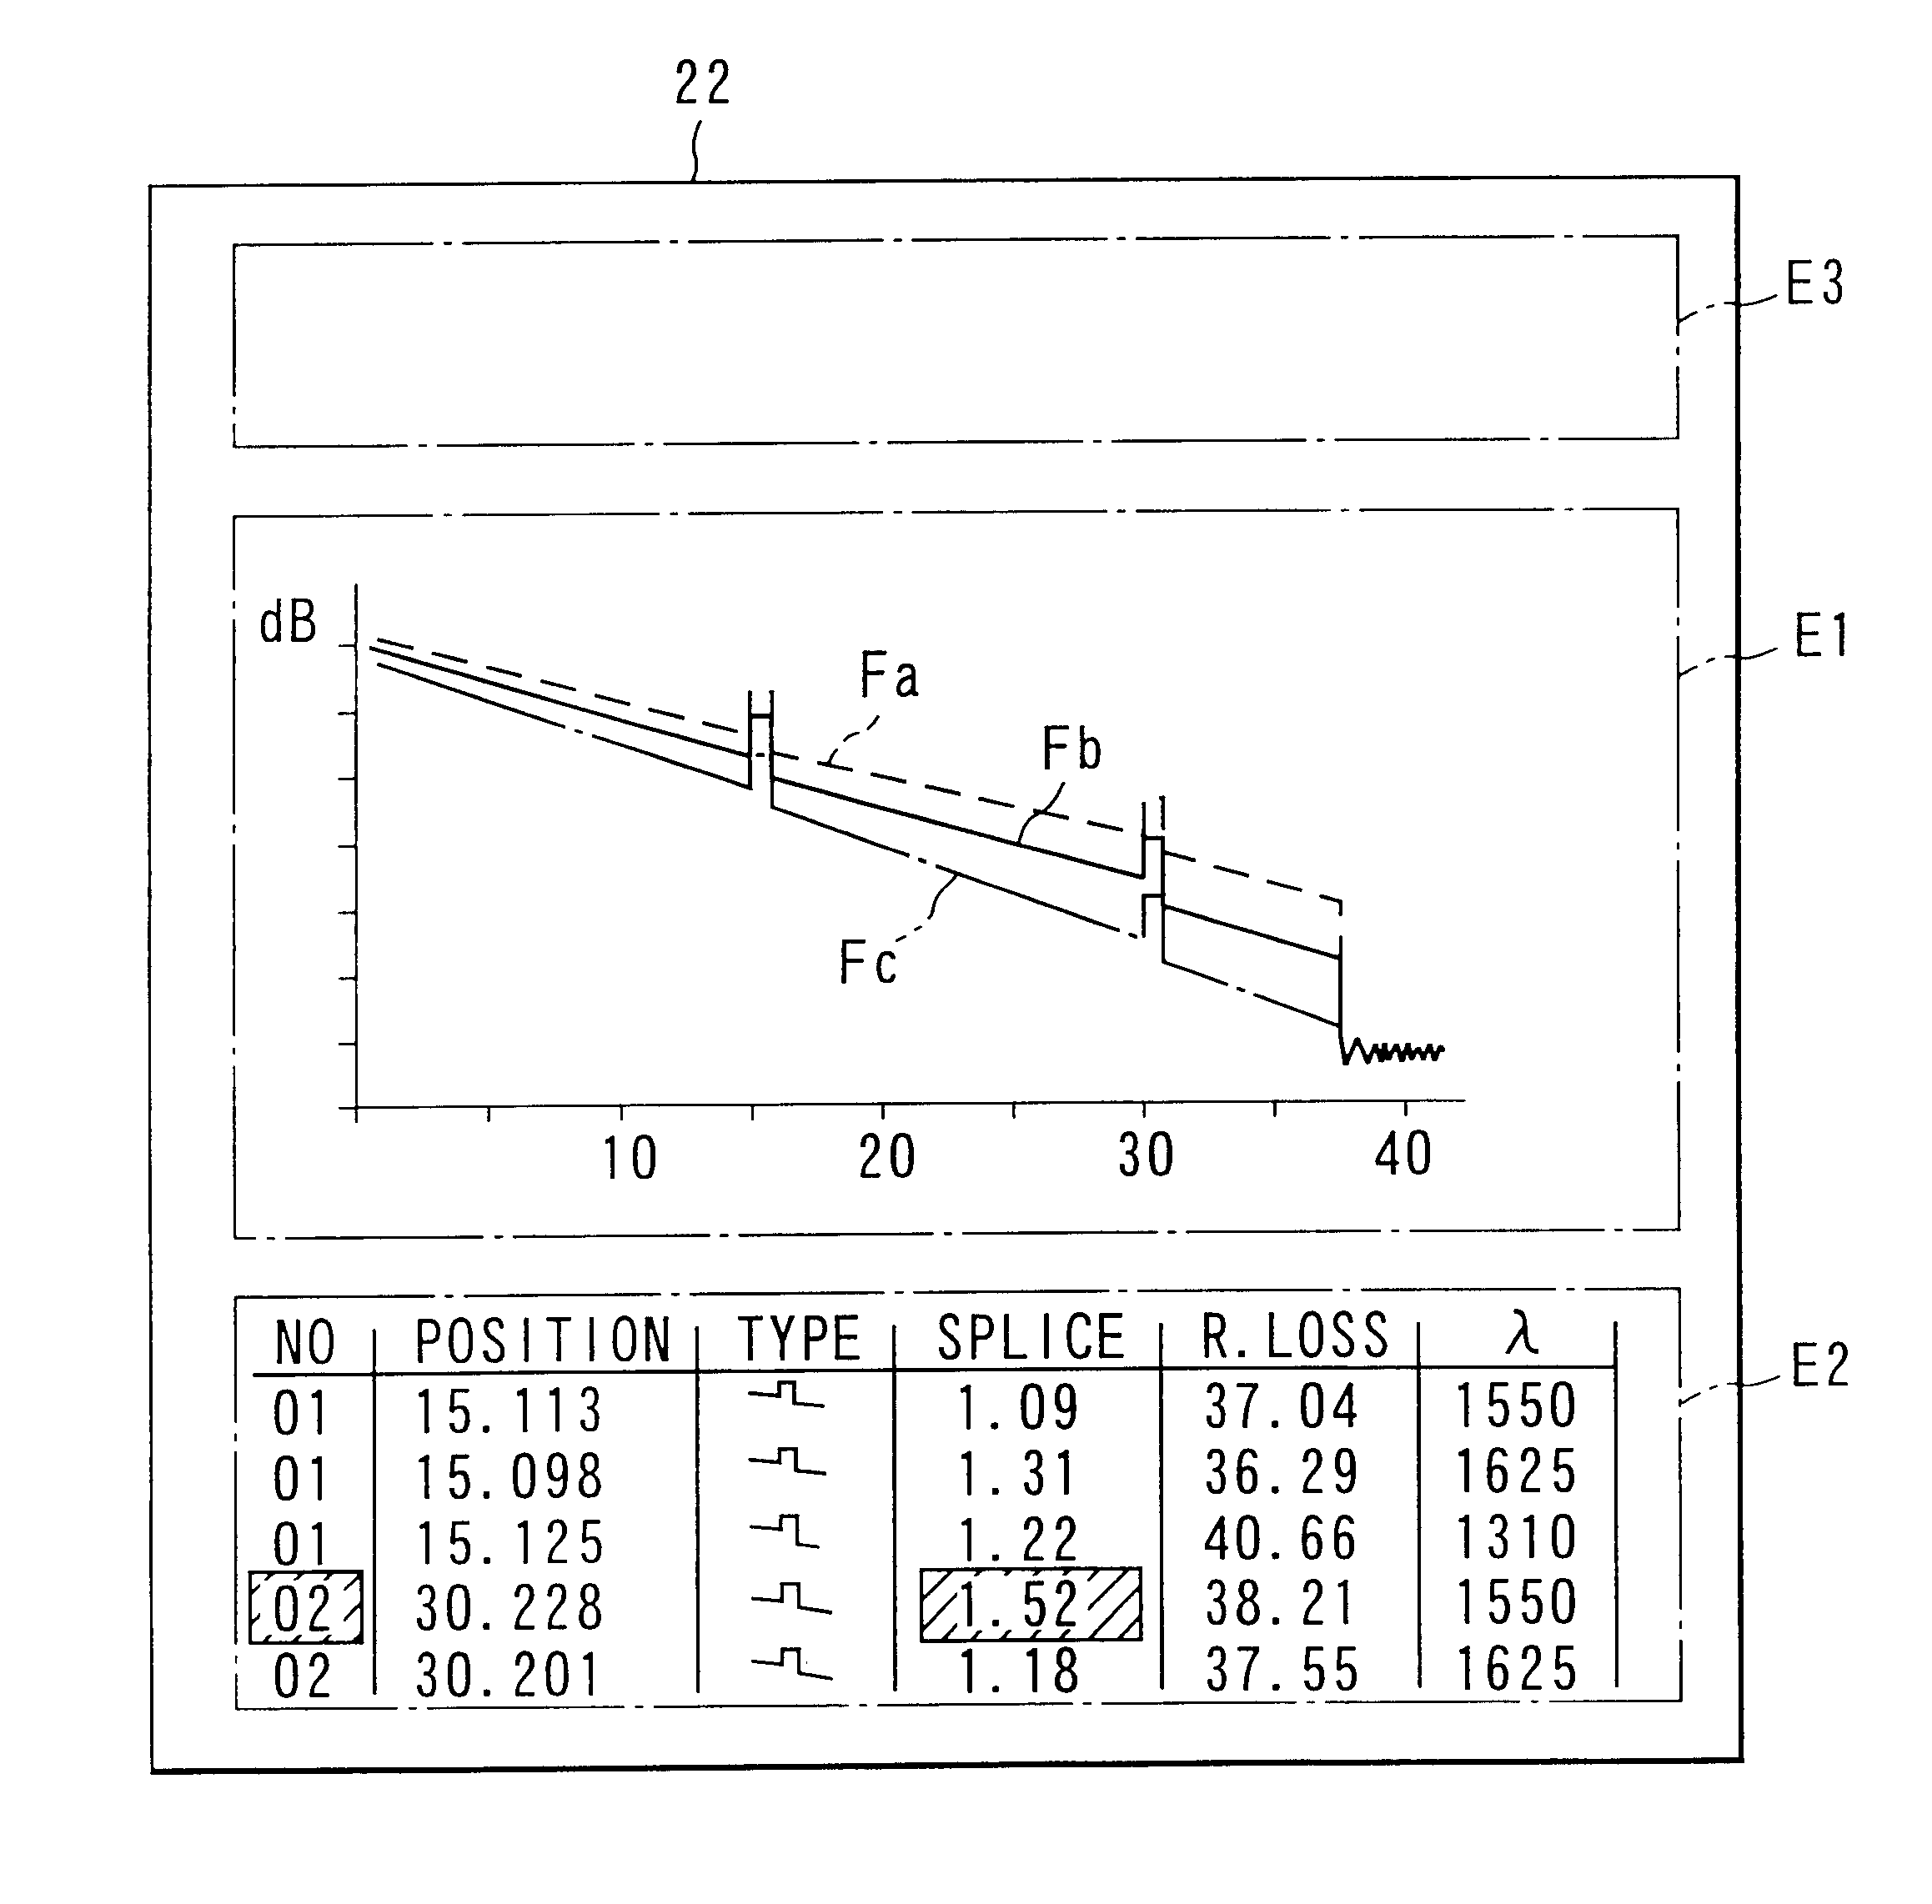 Optical time domain reflectometer which measures an optical fiber with different wavelengths according to an order and collectively displays waveform data and a list of events for each waveform in the same screen